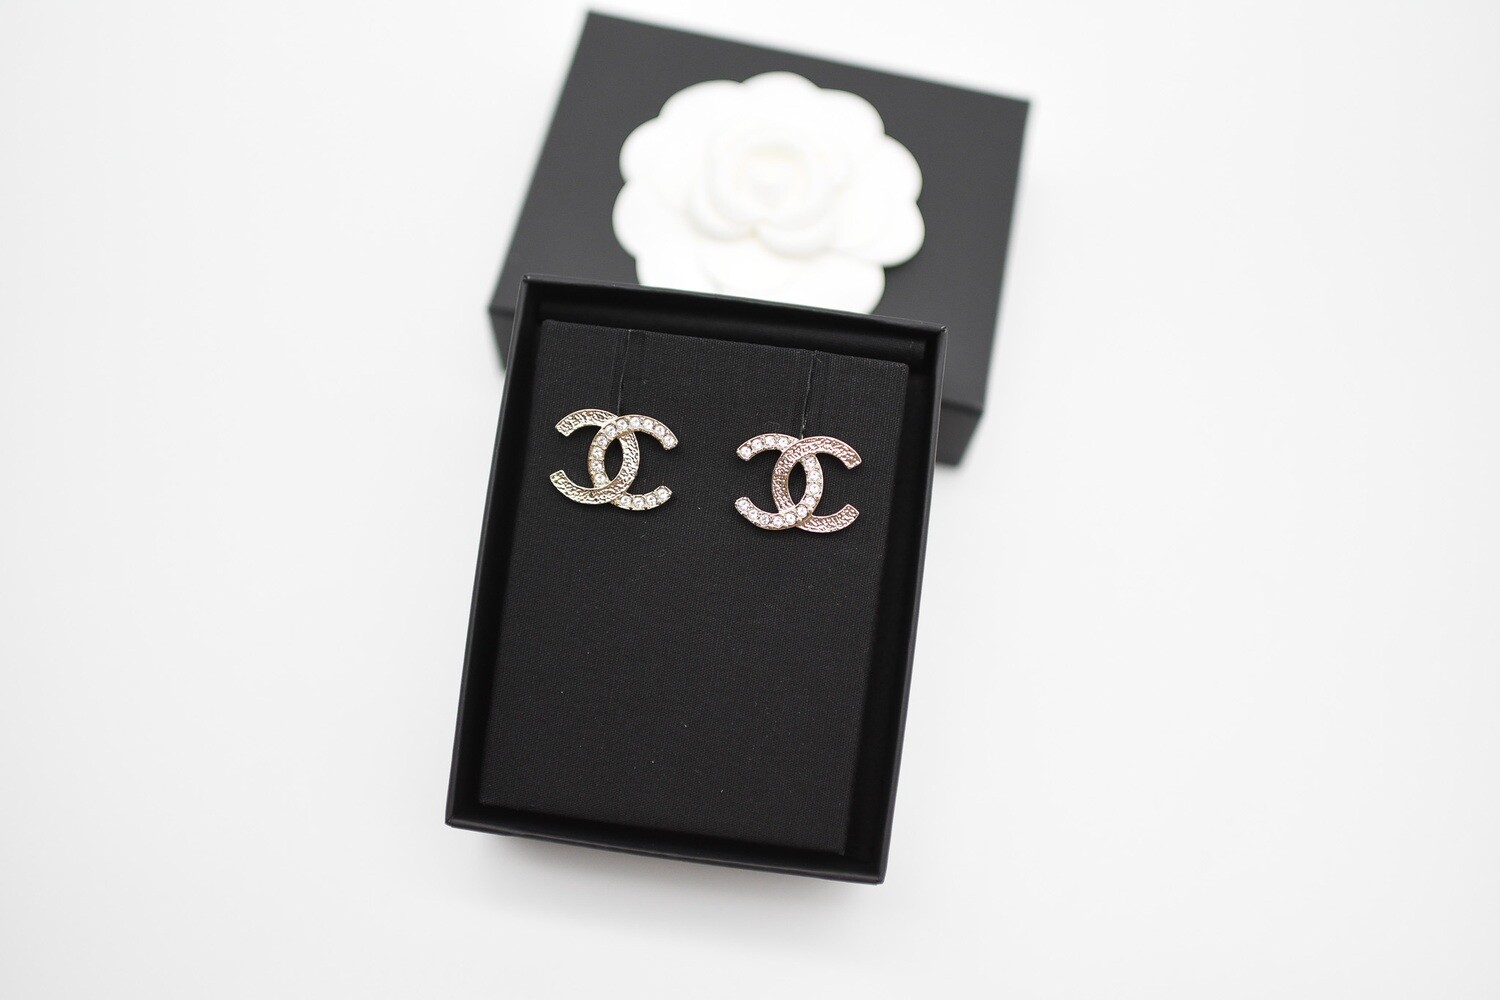 Chanel Earrings Large CC Stud with Crystals, Gold Hardware, New in Box MA001